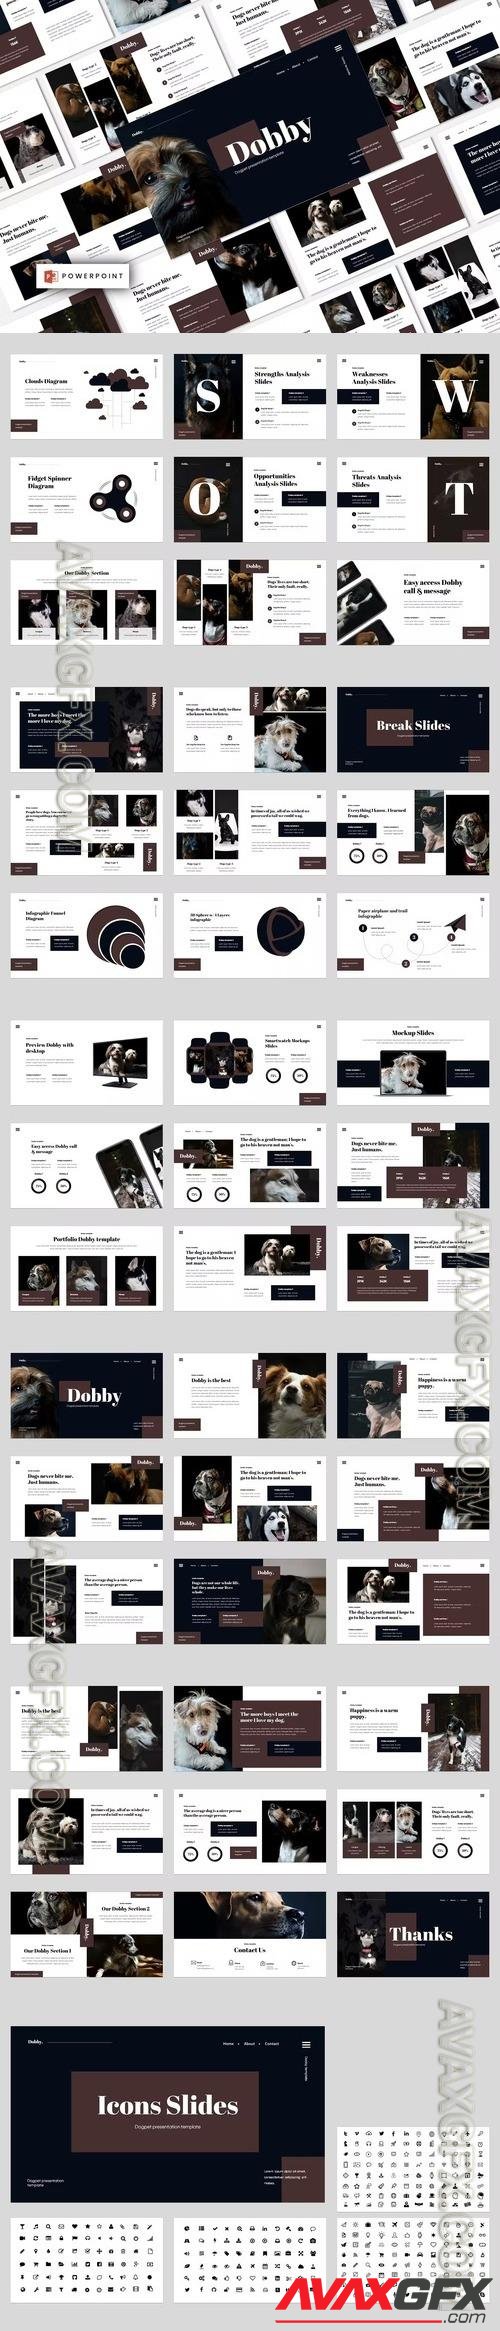 Dobby - Pet Shop Powerpoint Template